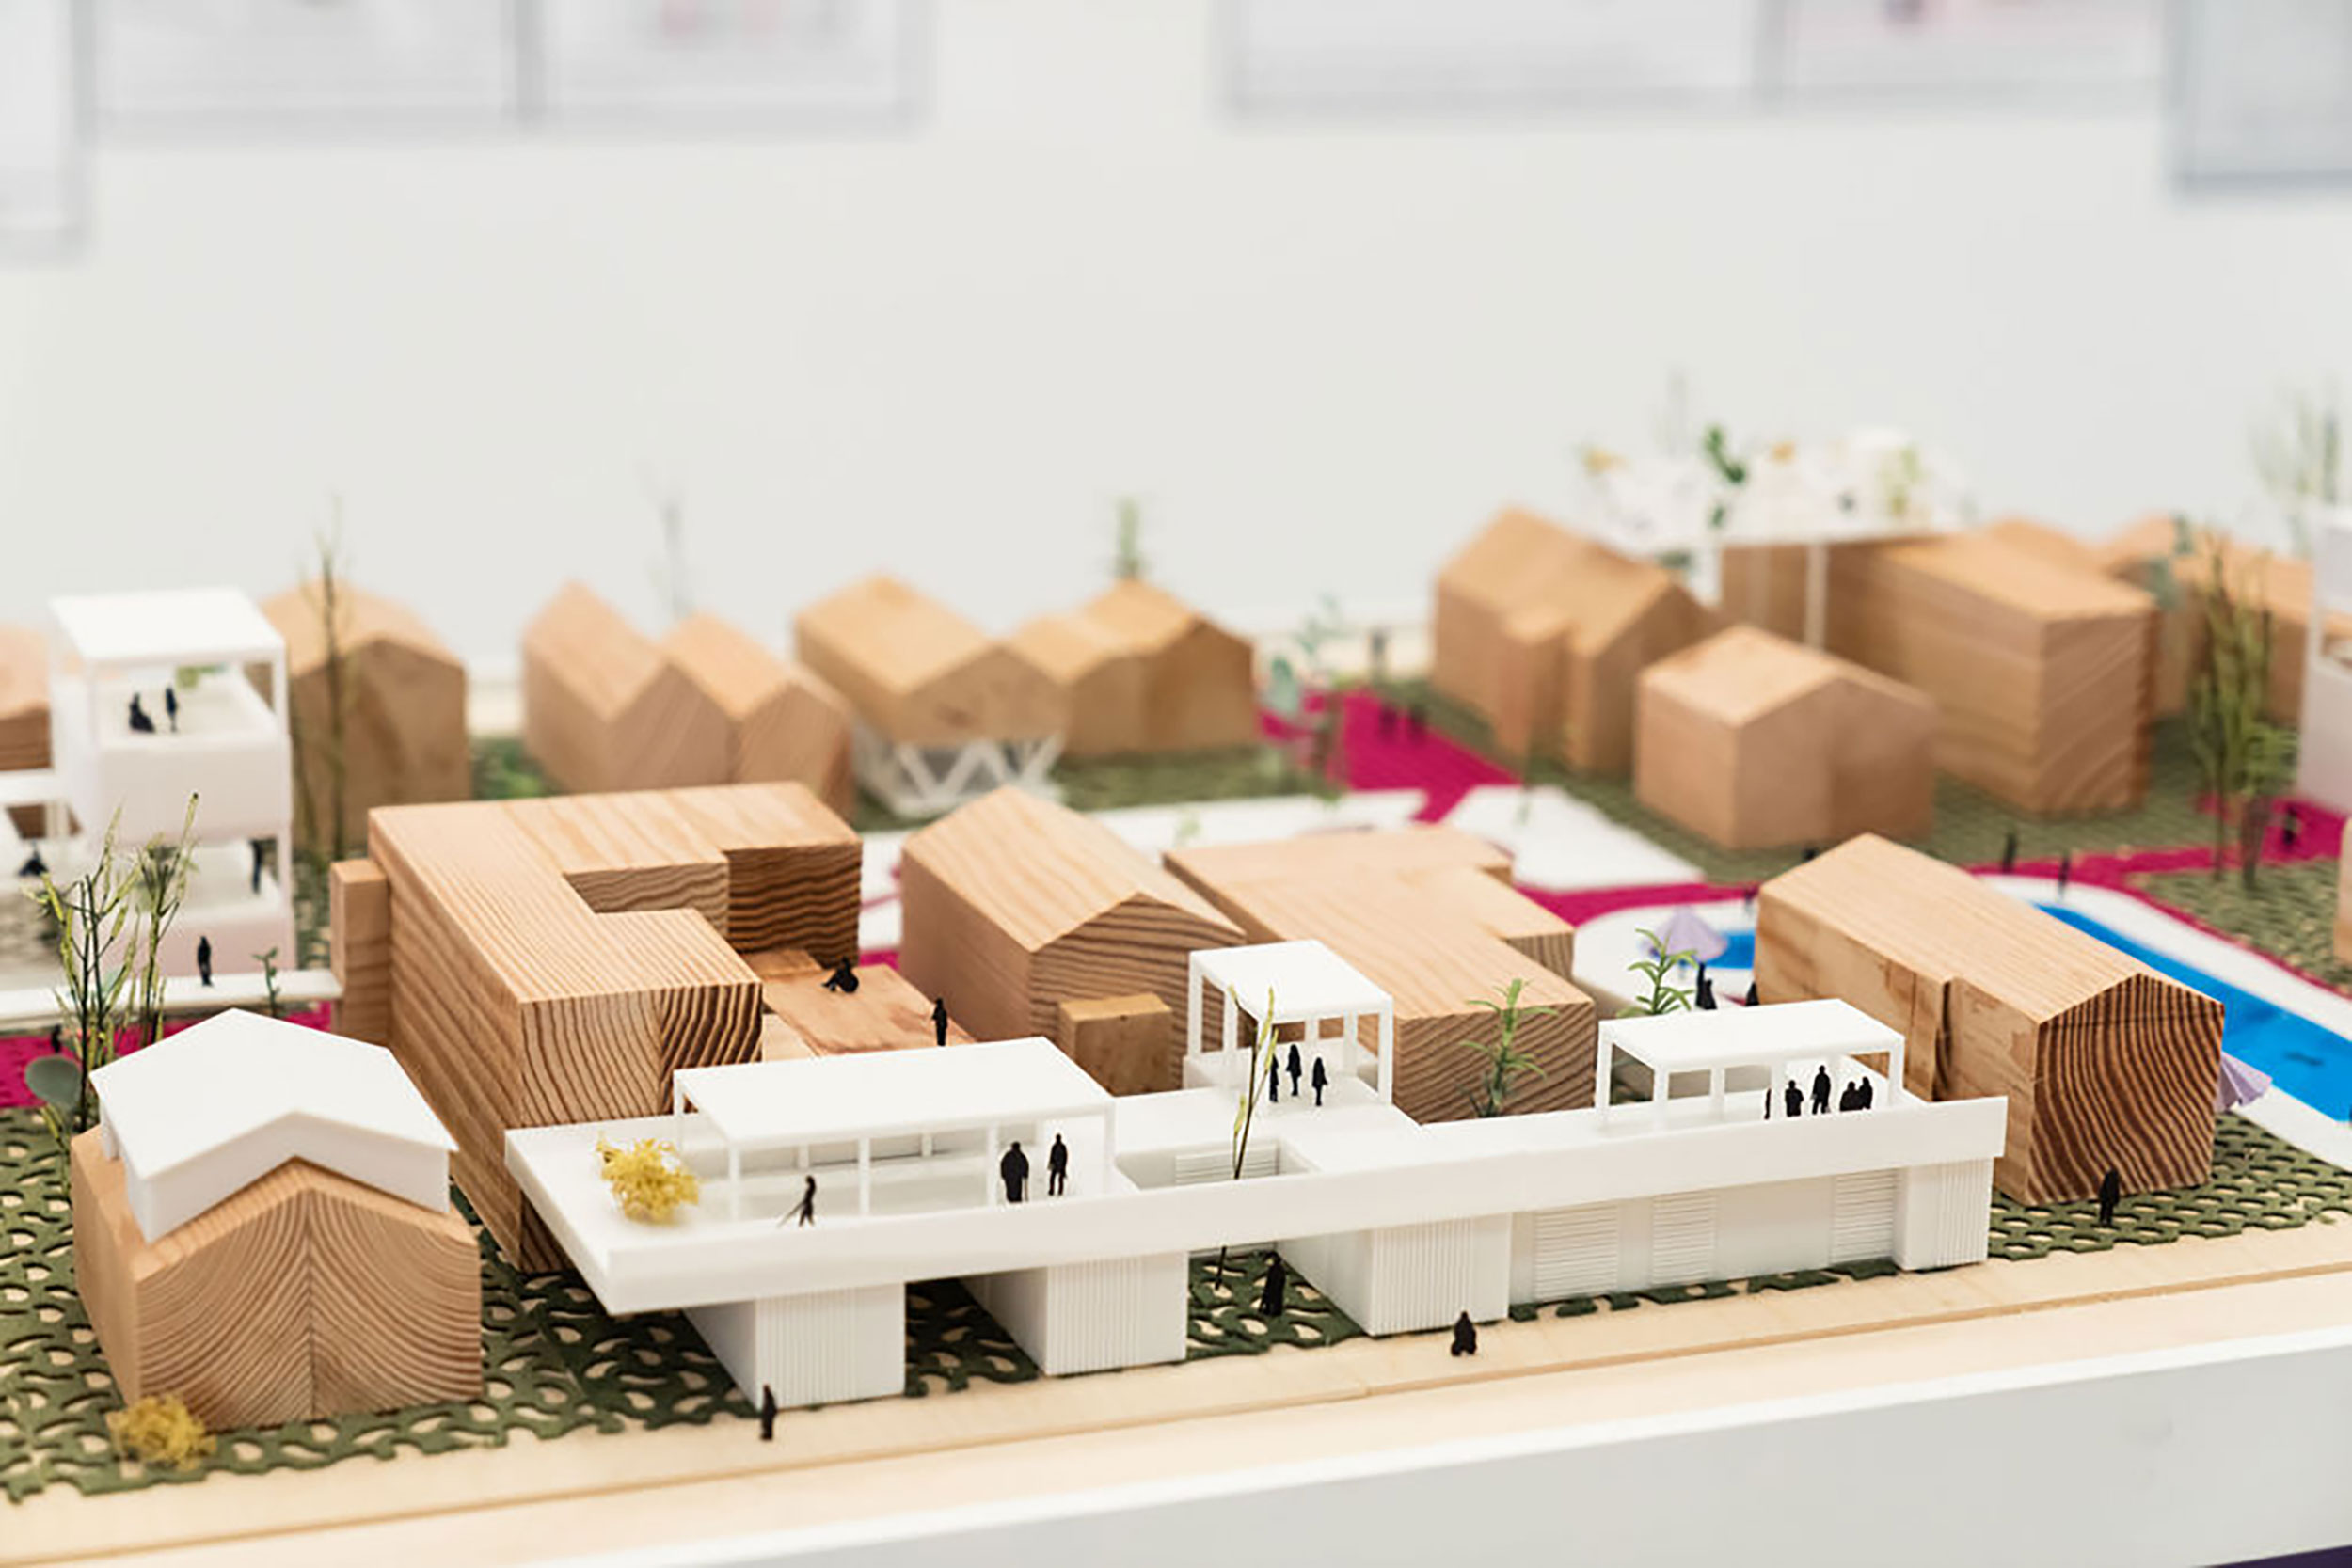 Three-dimensional model of a site with several buildings, some made of wood and others 3D printed in white plastic.